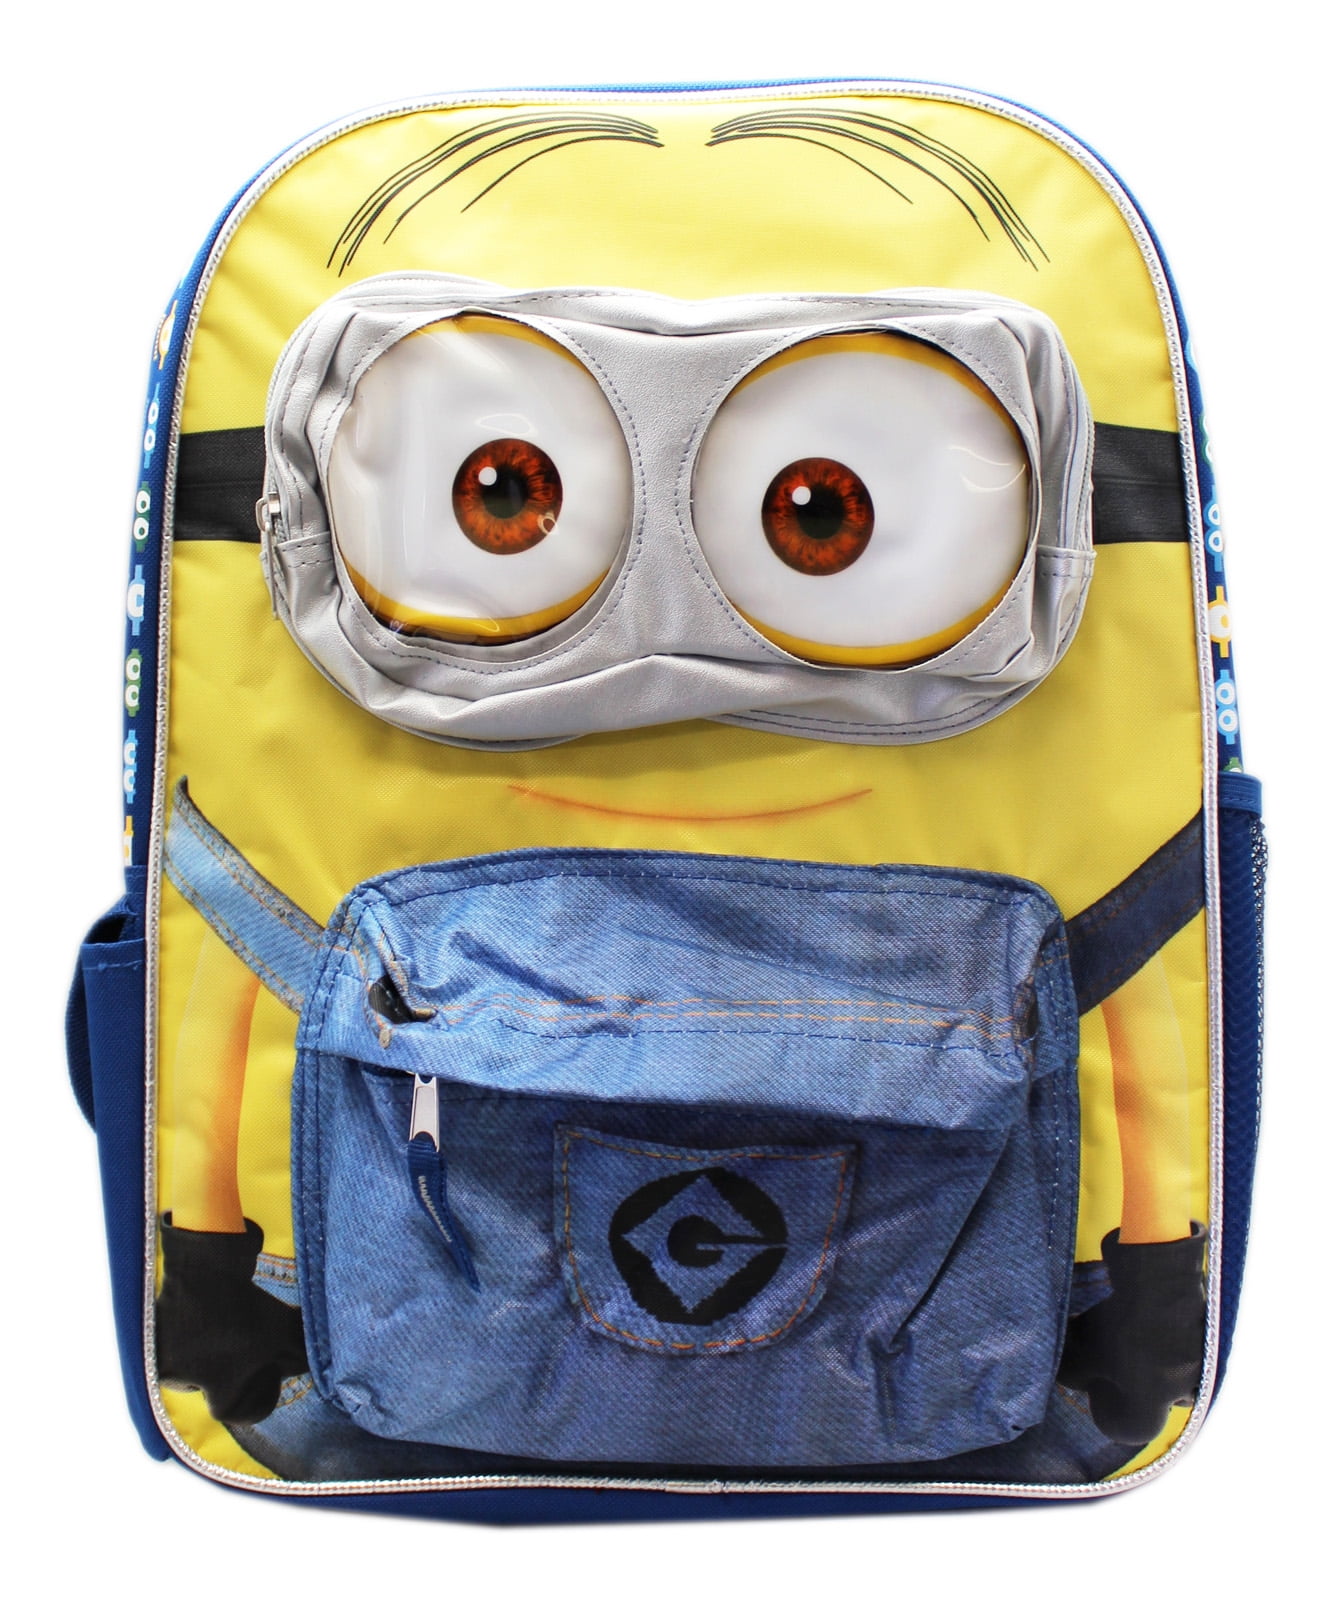 Despicable Me Minion Toddler size Backpack 12" 3-D pop up Image 